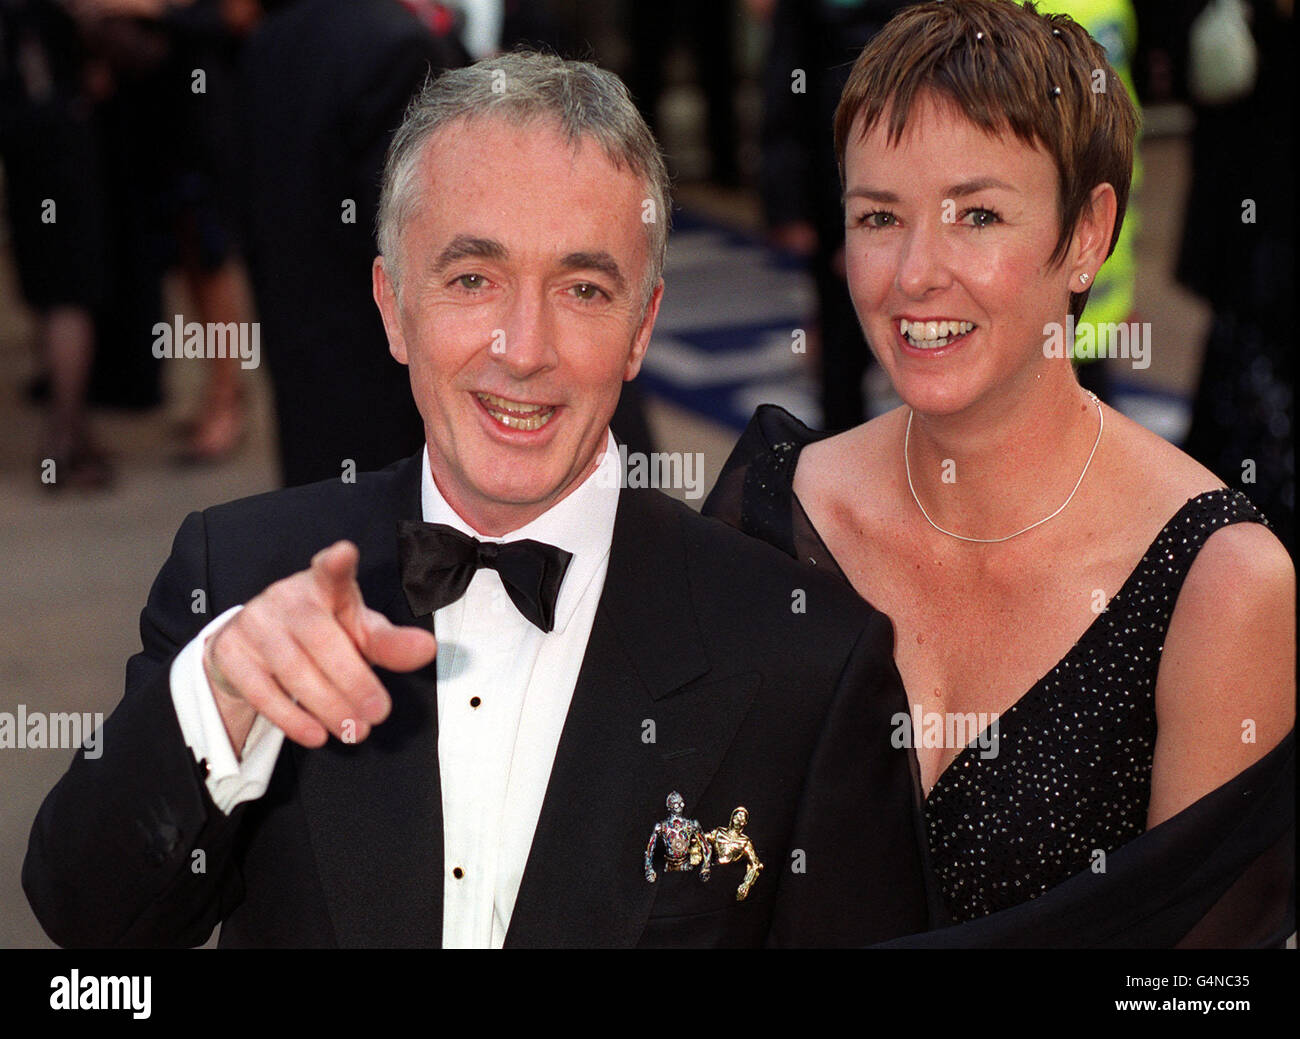 Actor Anthony Daniels (who plays C3PO) and his wife arriving for the Royal Premiere of 'Star Wars Episode 1: The Phantom Menace' at Leicester Square, London. Stock Photo